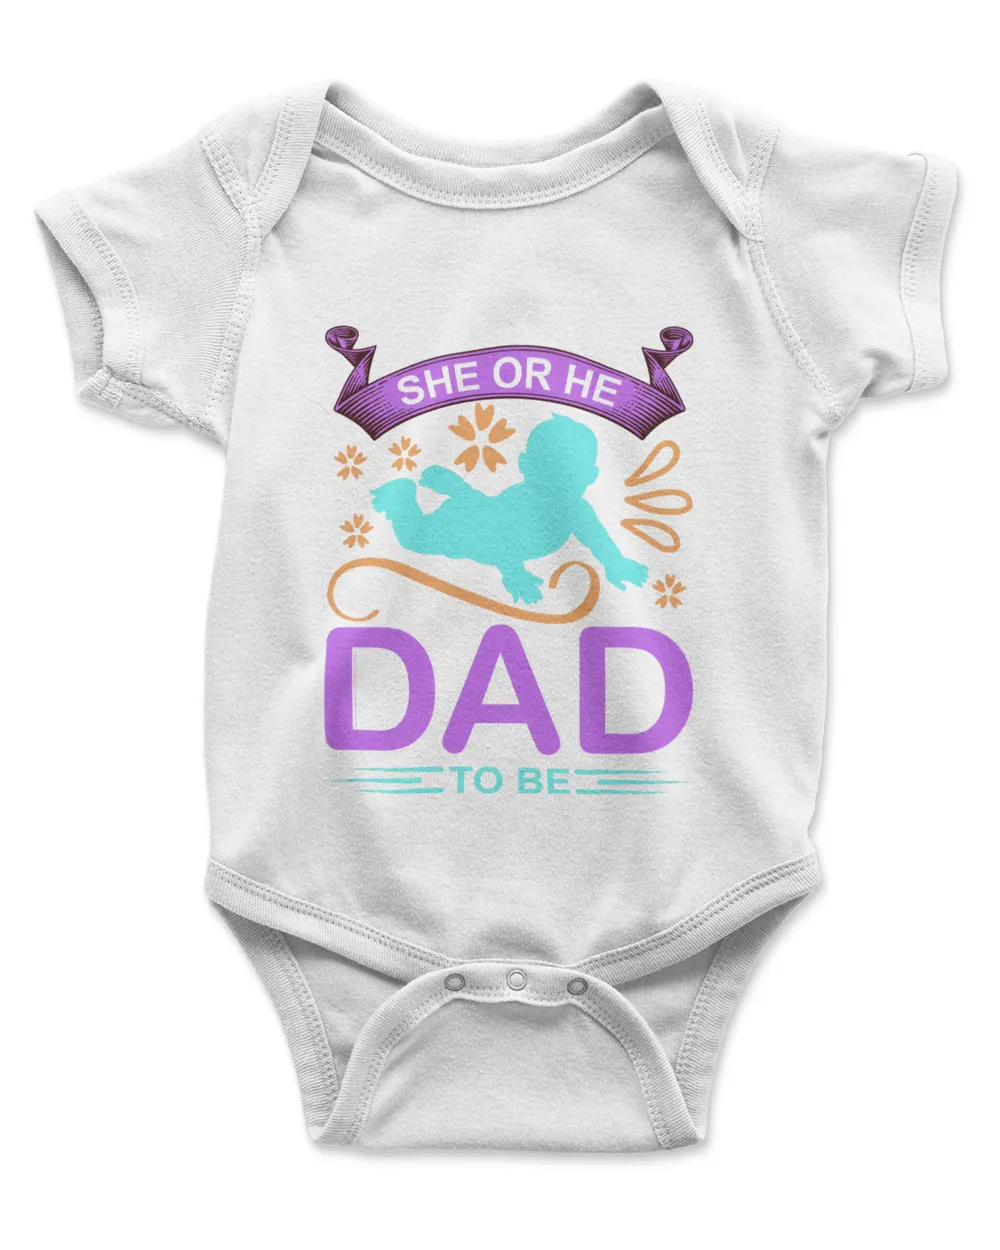 Baby Shirt, Love Baby T-Shirt, Infant baby suit (13)